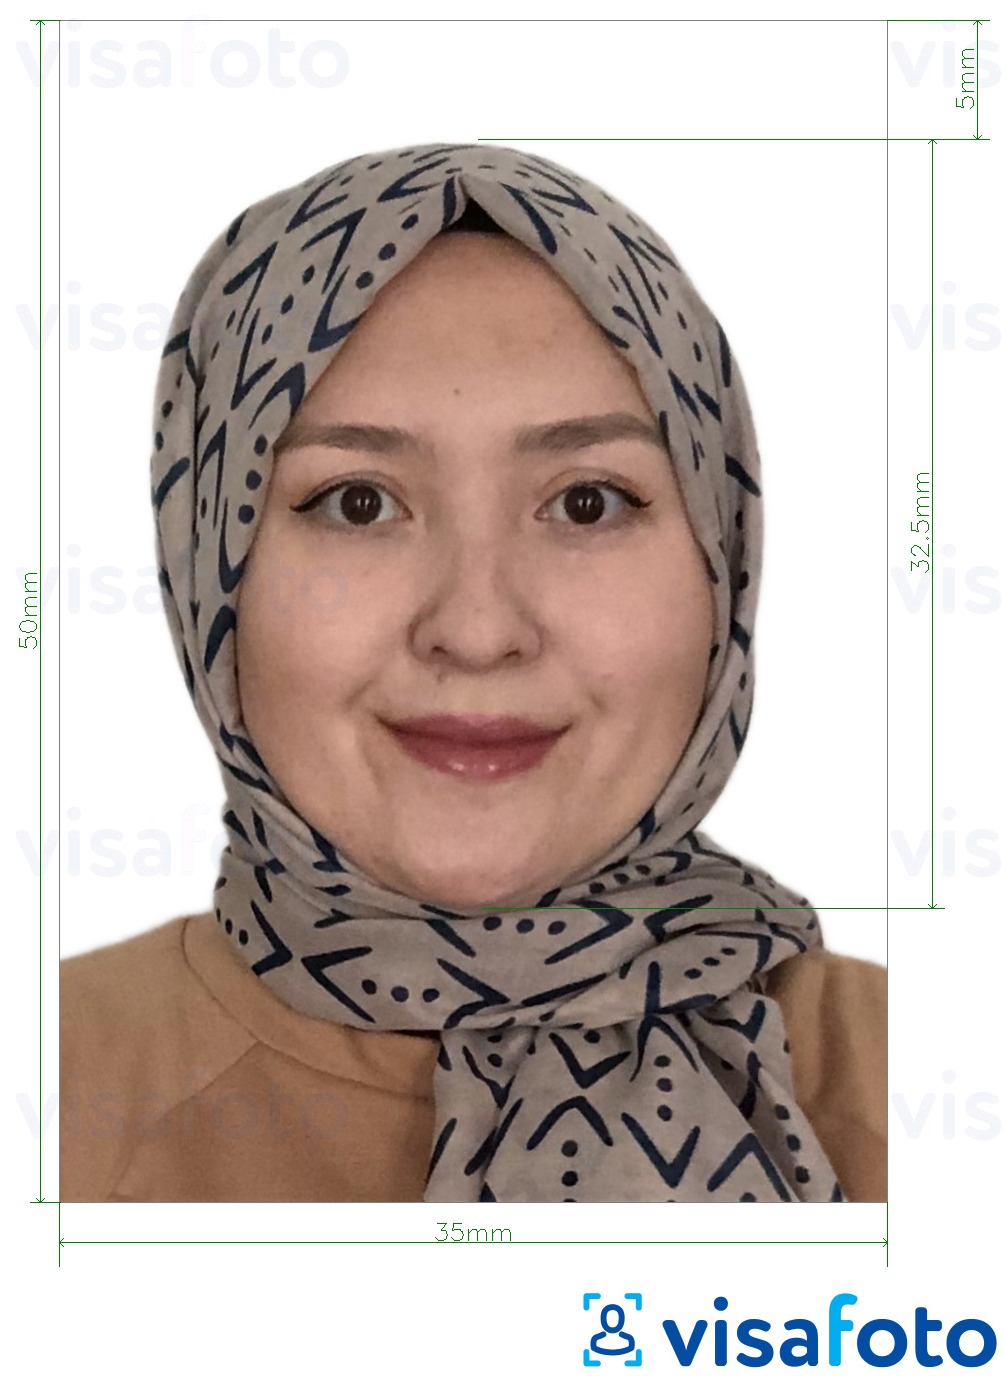 Example of photo for Malaysia eVisa online application 35x50 mm with exact size specification